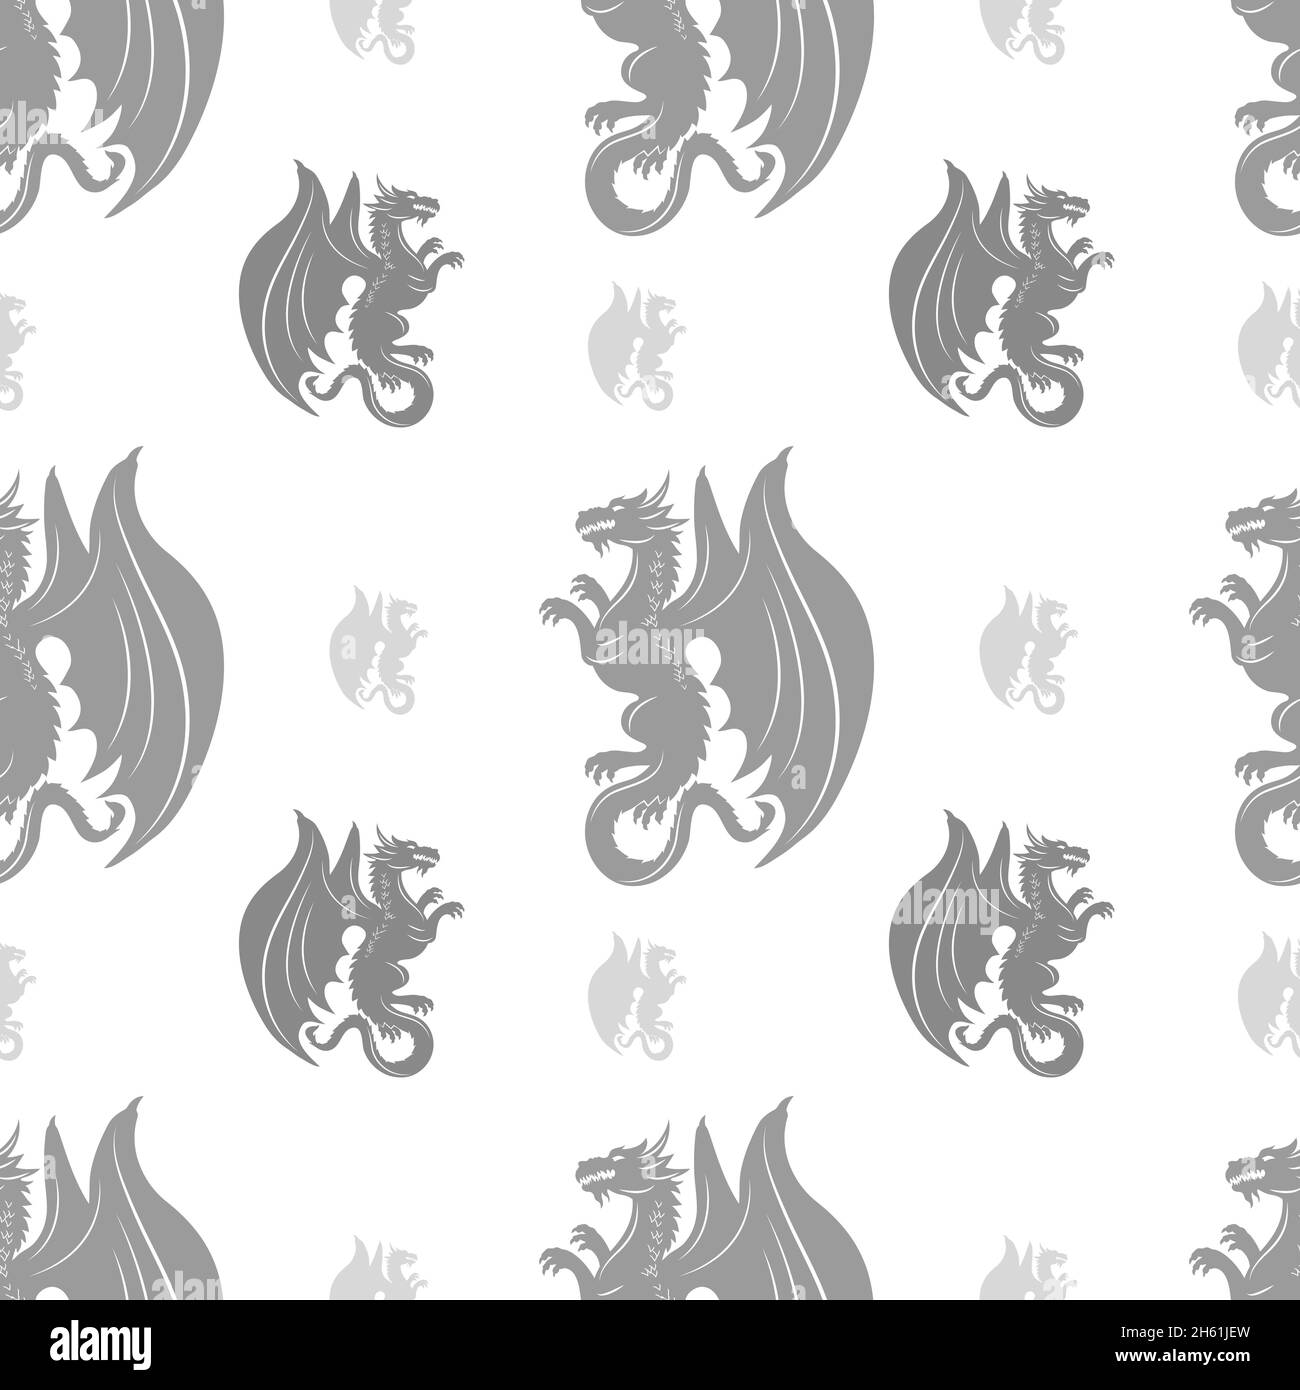 Dragon tail Black and White Stock Photos & Images - Alamy